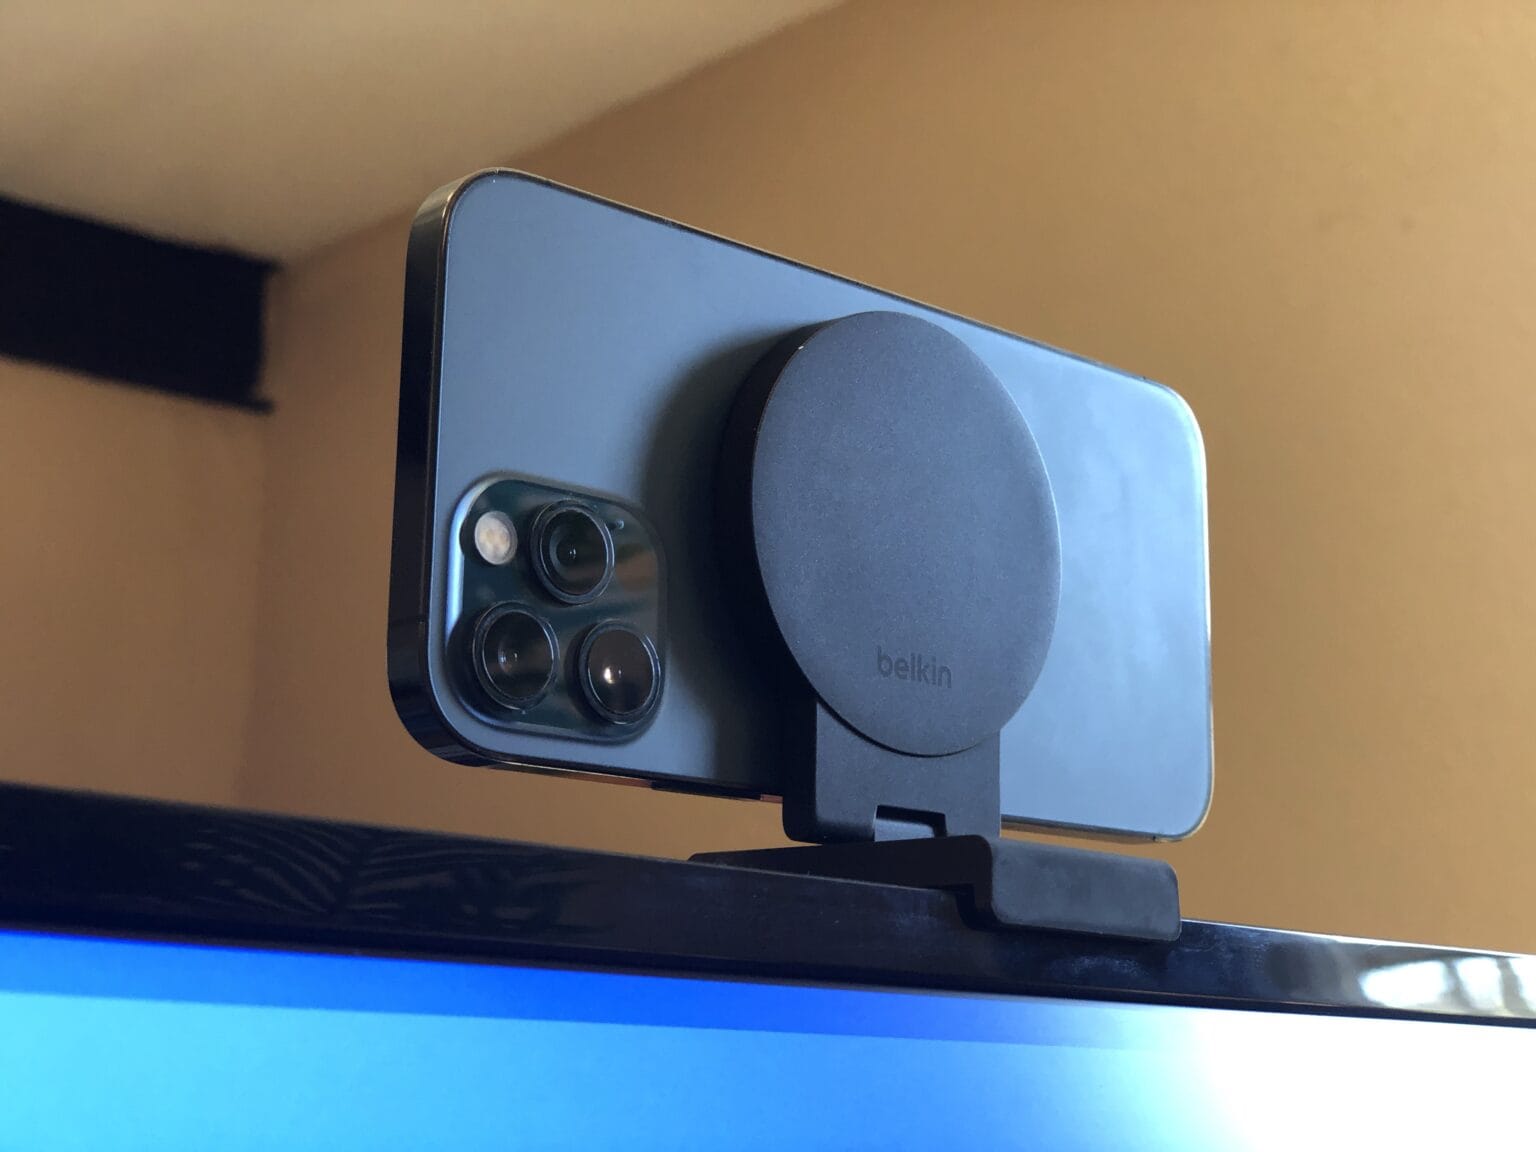 Belkin iPhone Mount review: Every display needs this MagSafe mount